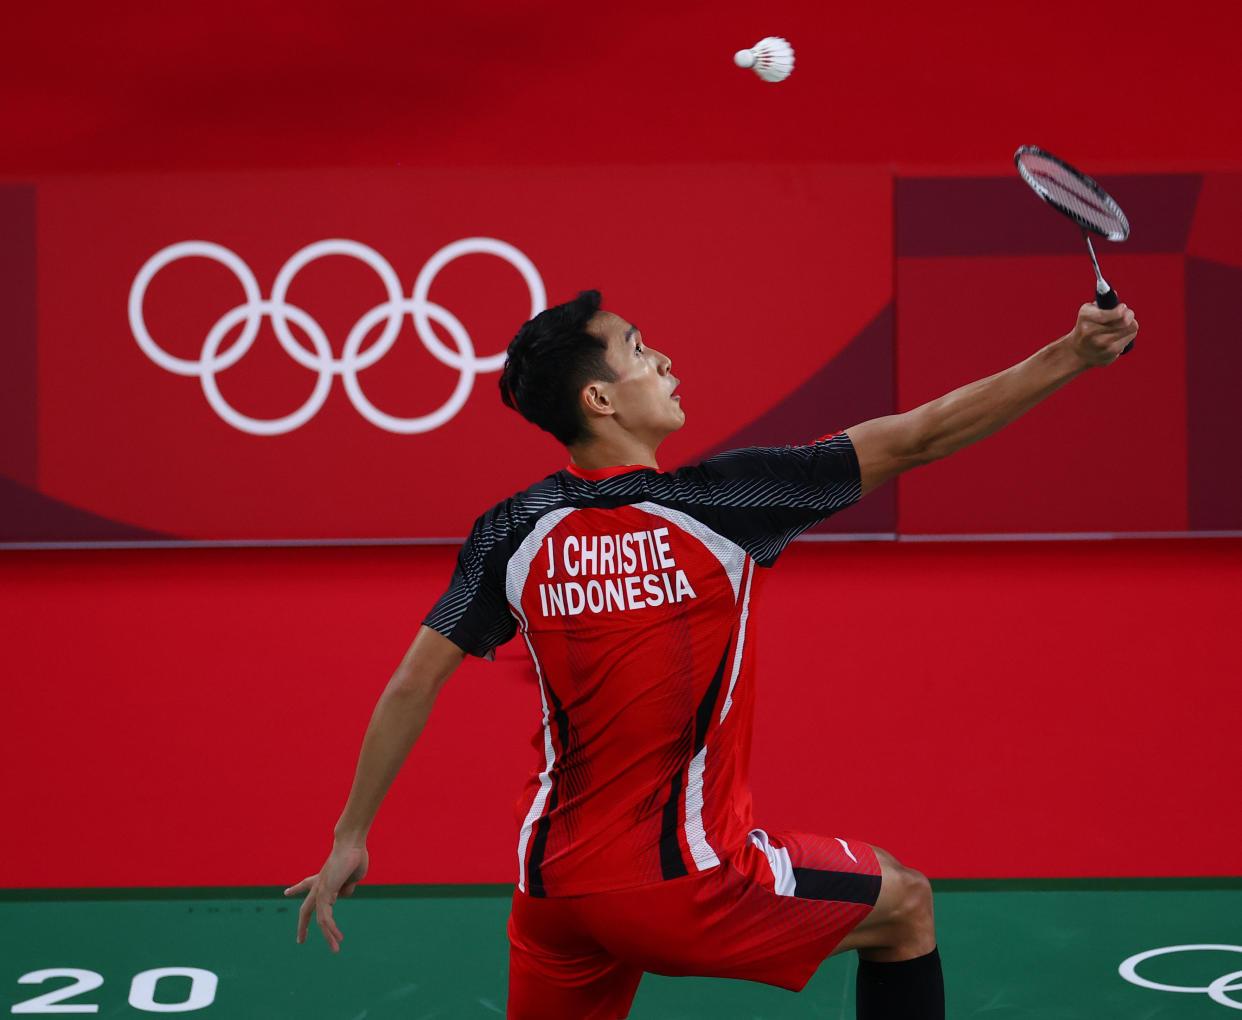 Tokyo 2020 Olympics - Badminton - Men's Singles - Group Stage - MFS - Musashino Forest Sport Plaza, Tokyo, Japan - July 24, 2021. Jonatan Christie of Indonesia in action during the match against Aram Mahmoud of the Refugee Olympic Team. REUTERS/Leonhard Foeger